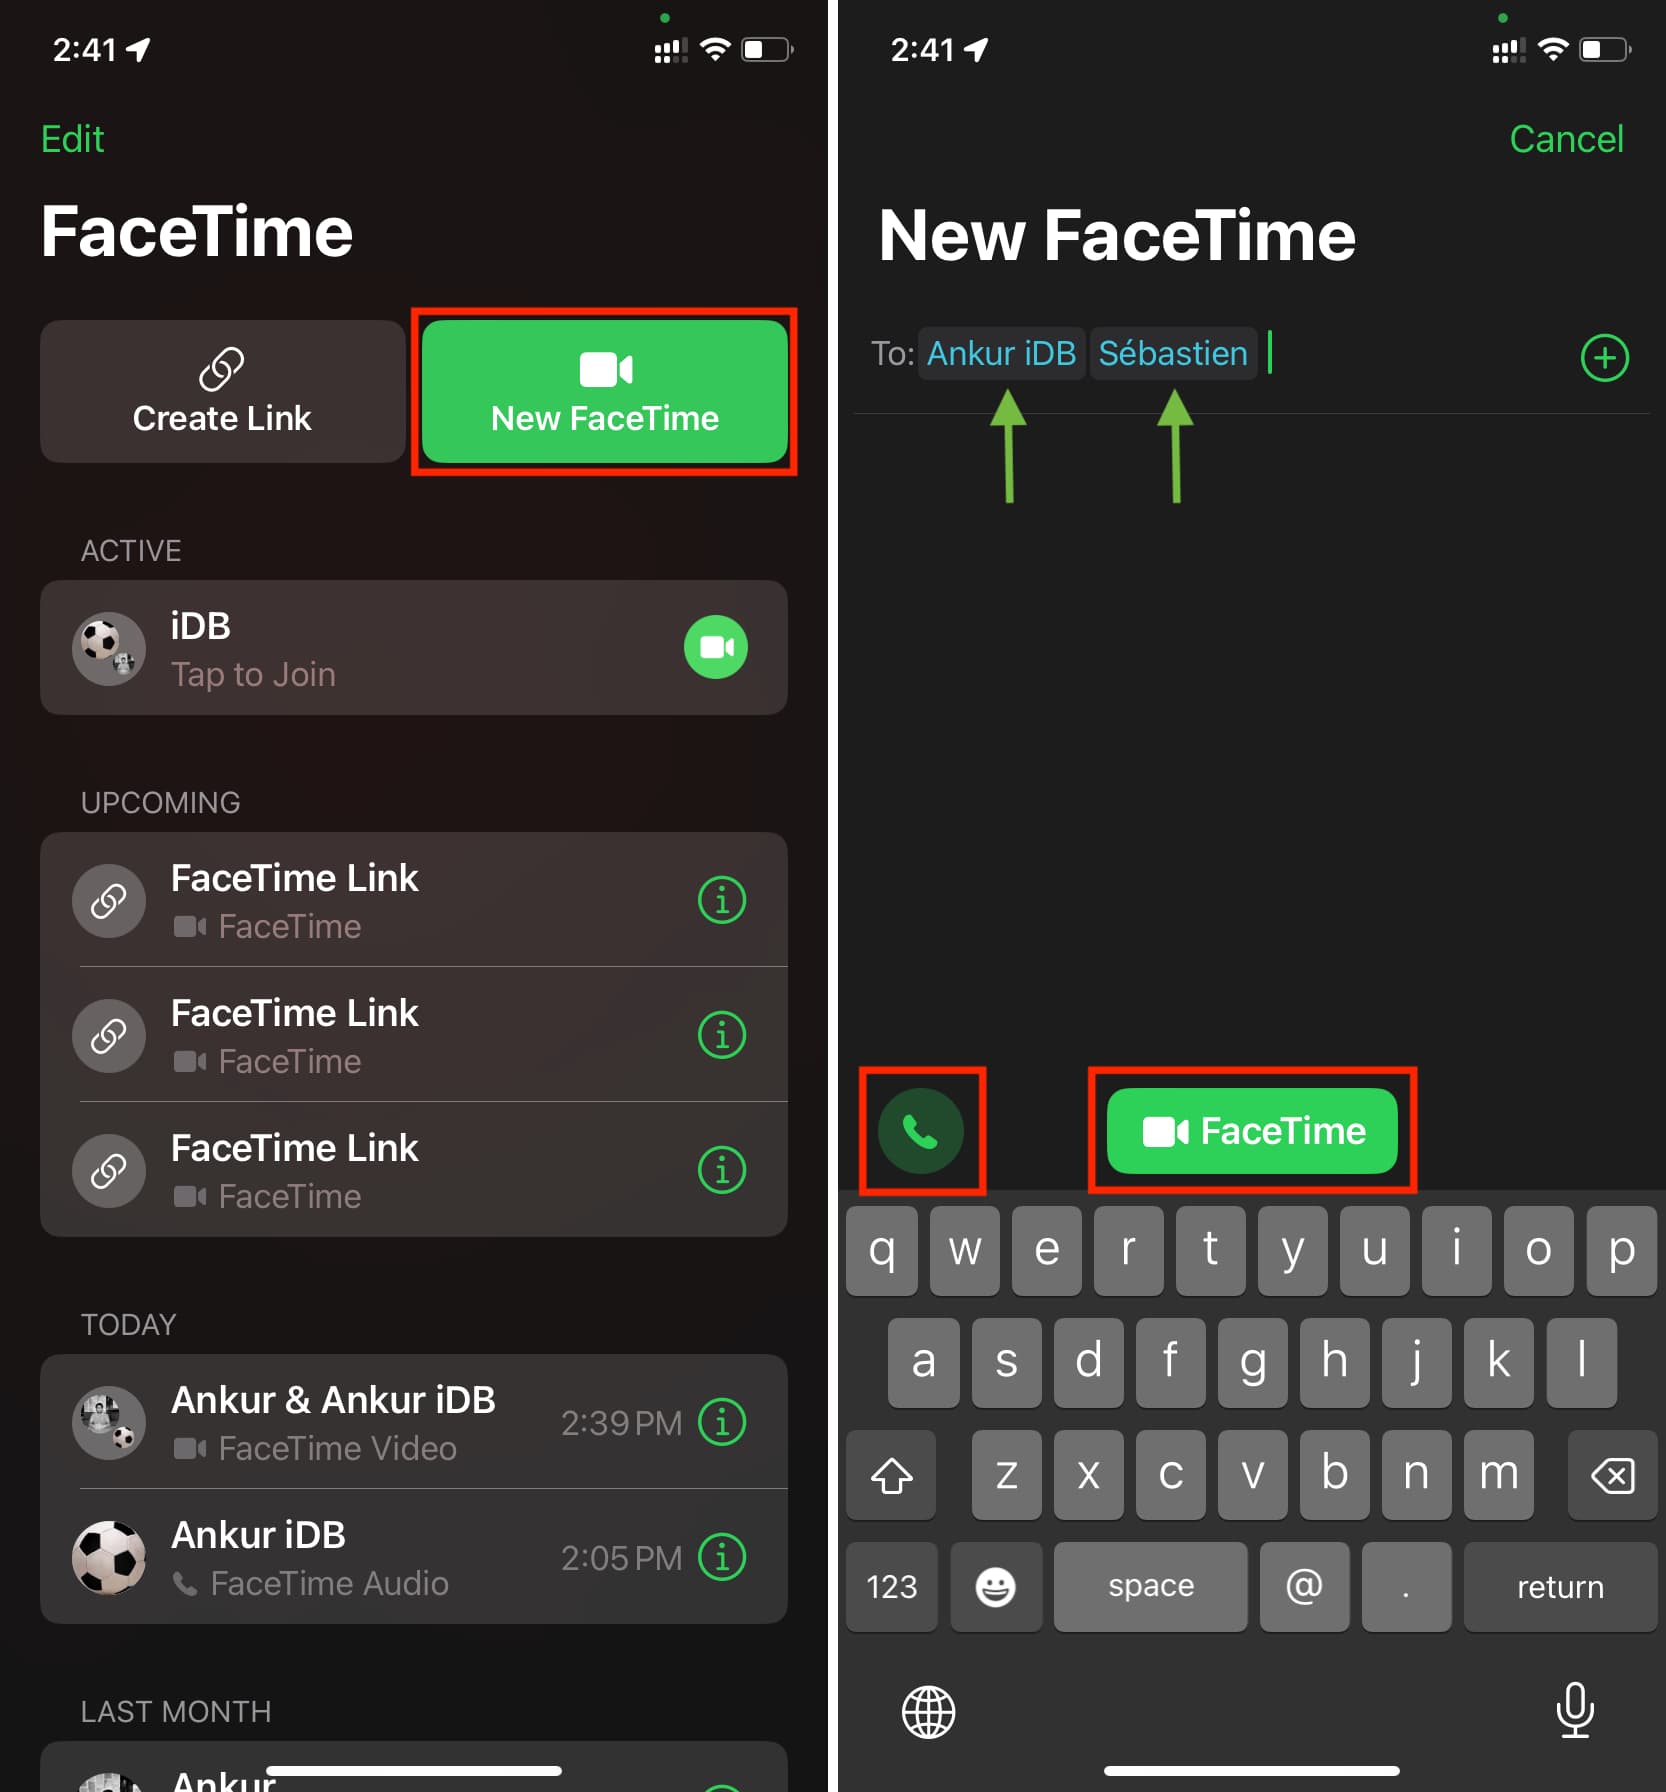 Start a new FaceTime group call from the FaceTime app on iPhone